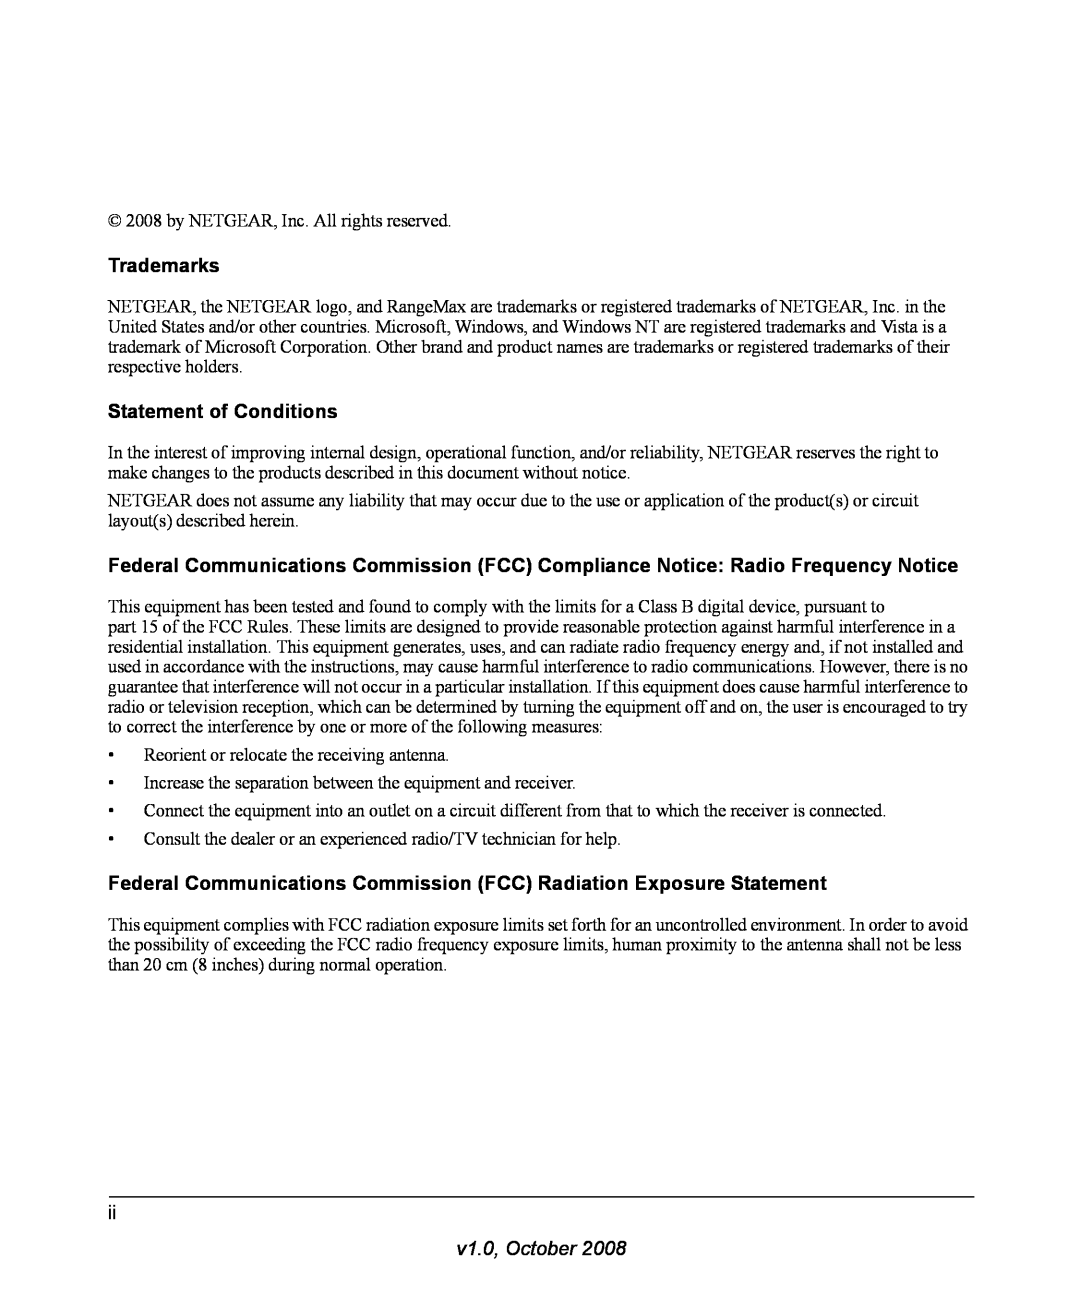 NETGEAR DG834N Trademarks, Statement of Conditions, Federal Communications Commission FCC Radiation Exposure Statement 